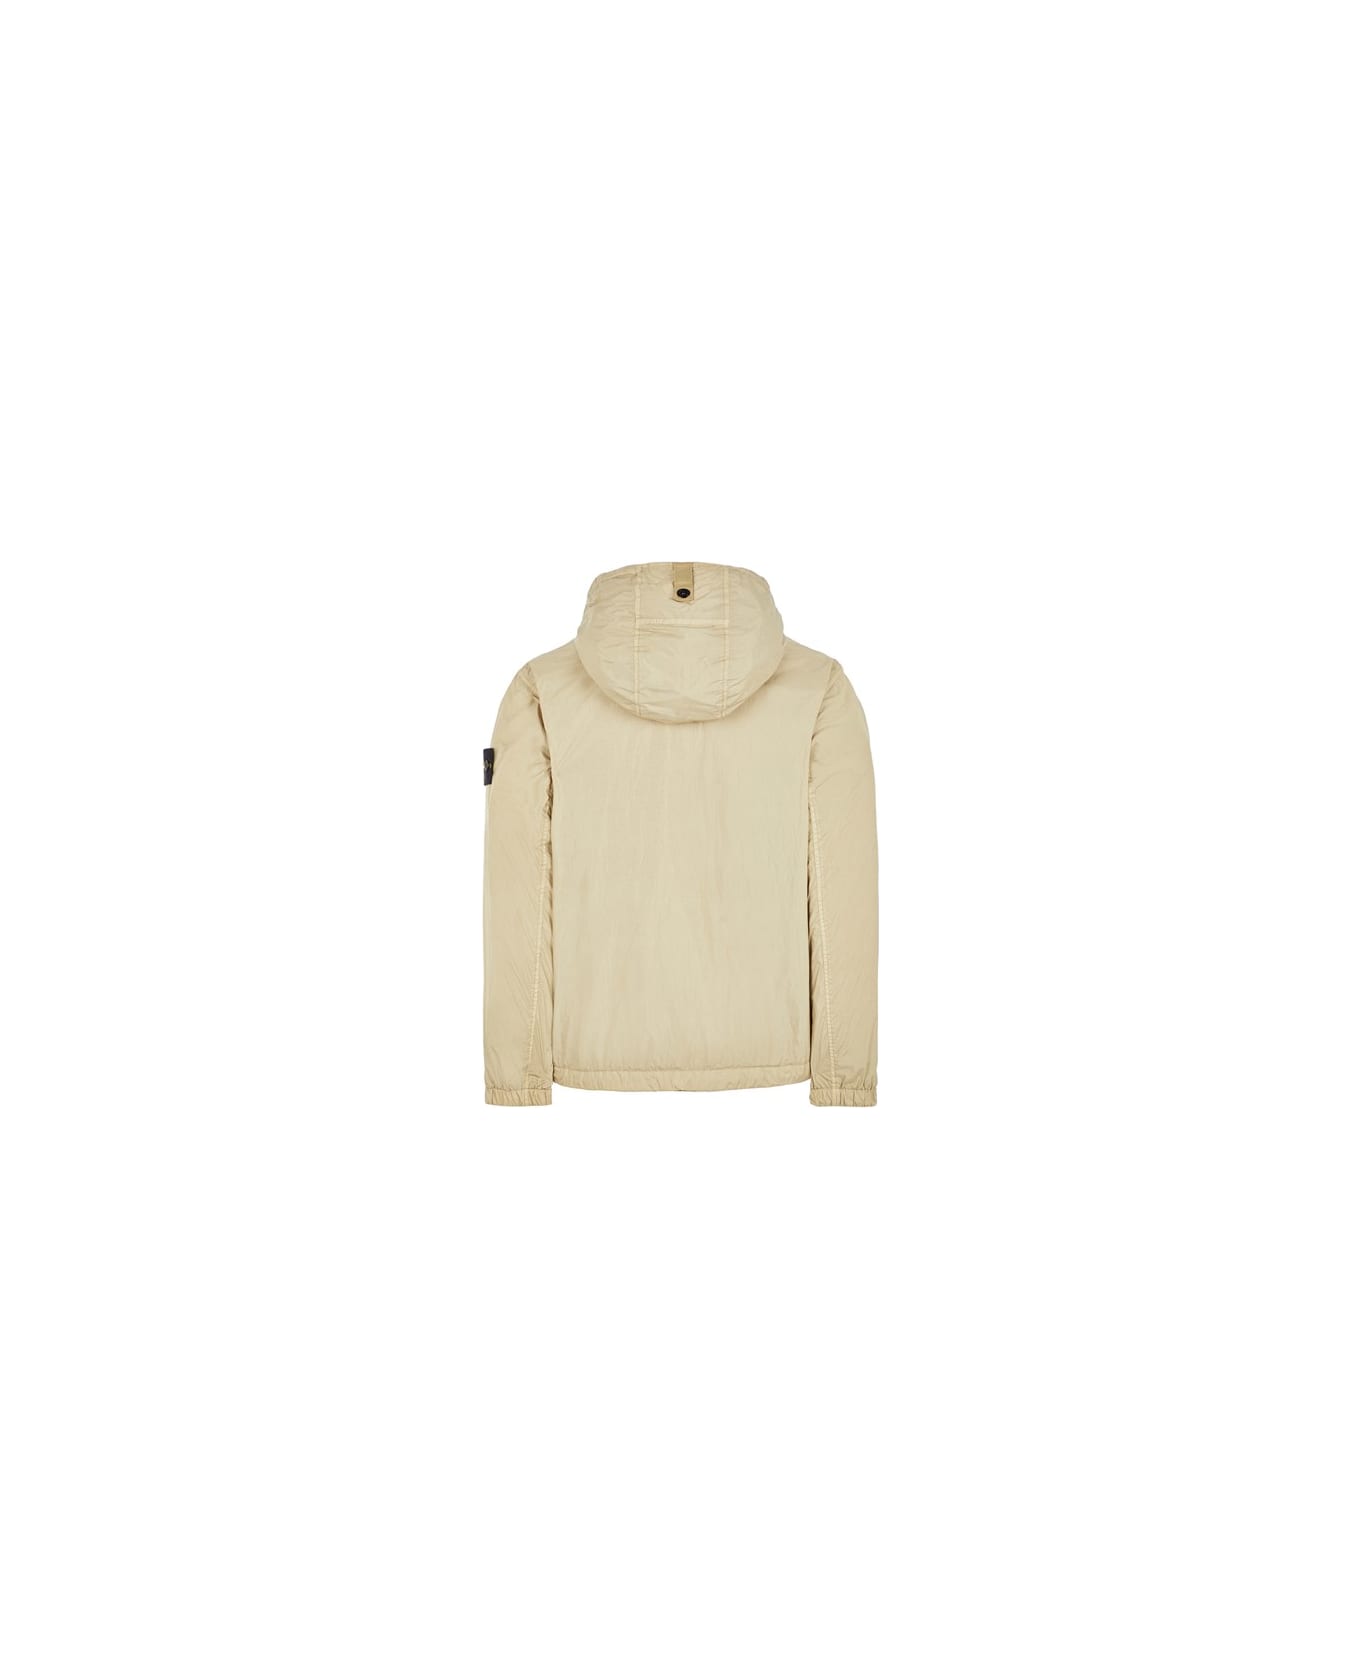 Stone Island Garment Dyed Crinkle Reps Jacket - Nude & Neutrals ダウンジャケット